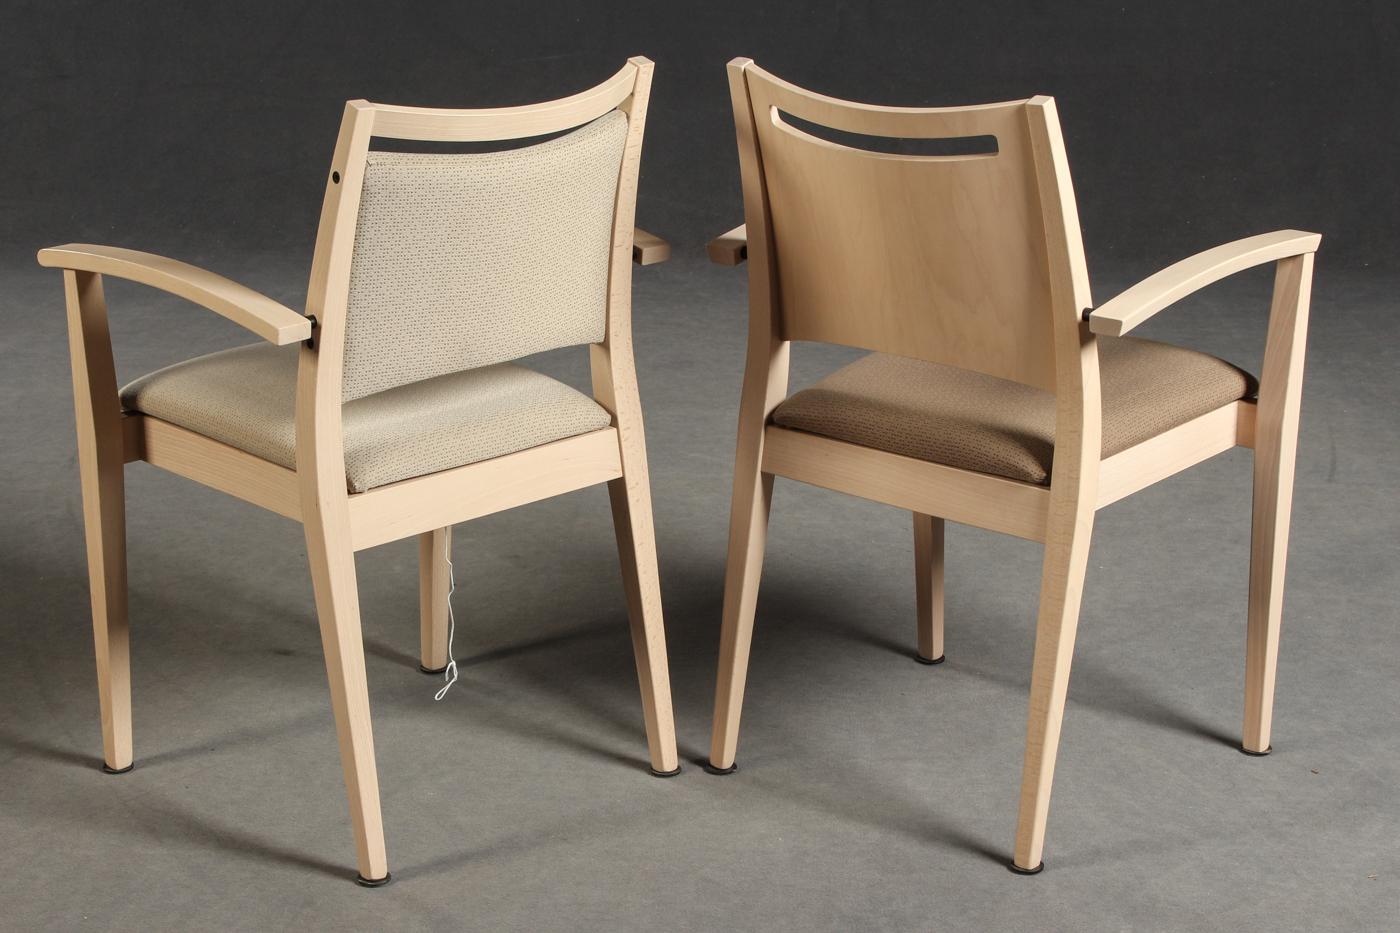 Pair of chairs by Brunner. Model Buena Nova. Design by Roland Schmidt, LSS designer. Frame made of beech wood, with armrests. Different upholstery, colors and fabrics. 